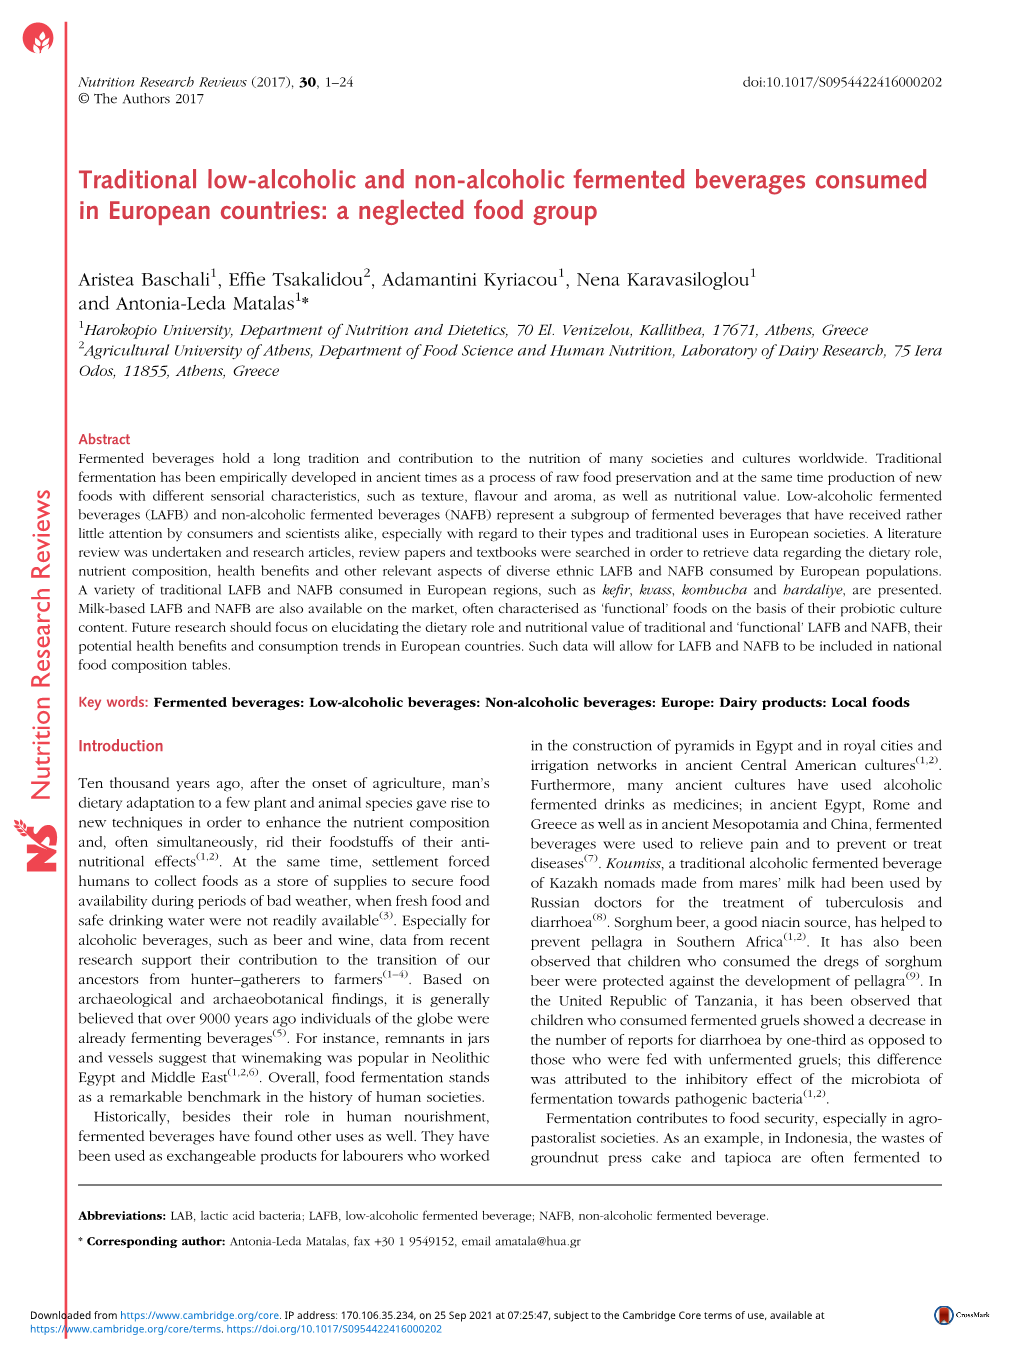 Traditional Low-Alcoholic and Non-Alcoholic Fermented Beverages Consumed in European Countries: a Neglected Food Group